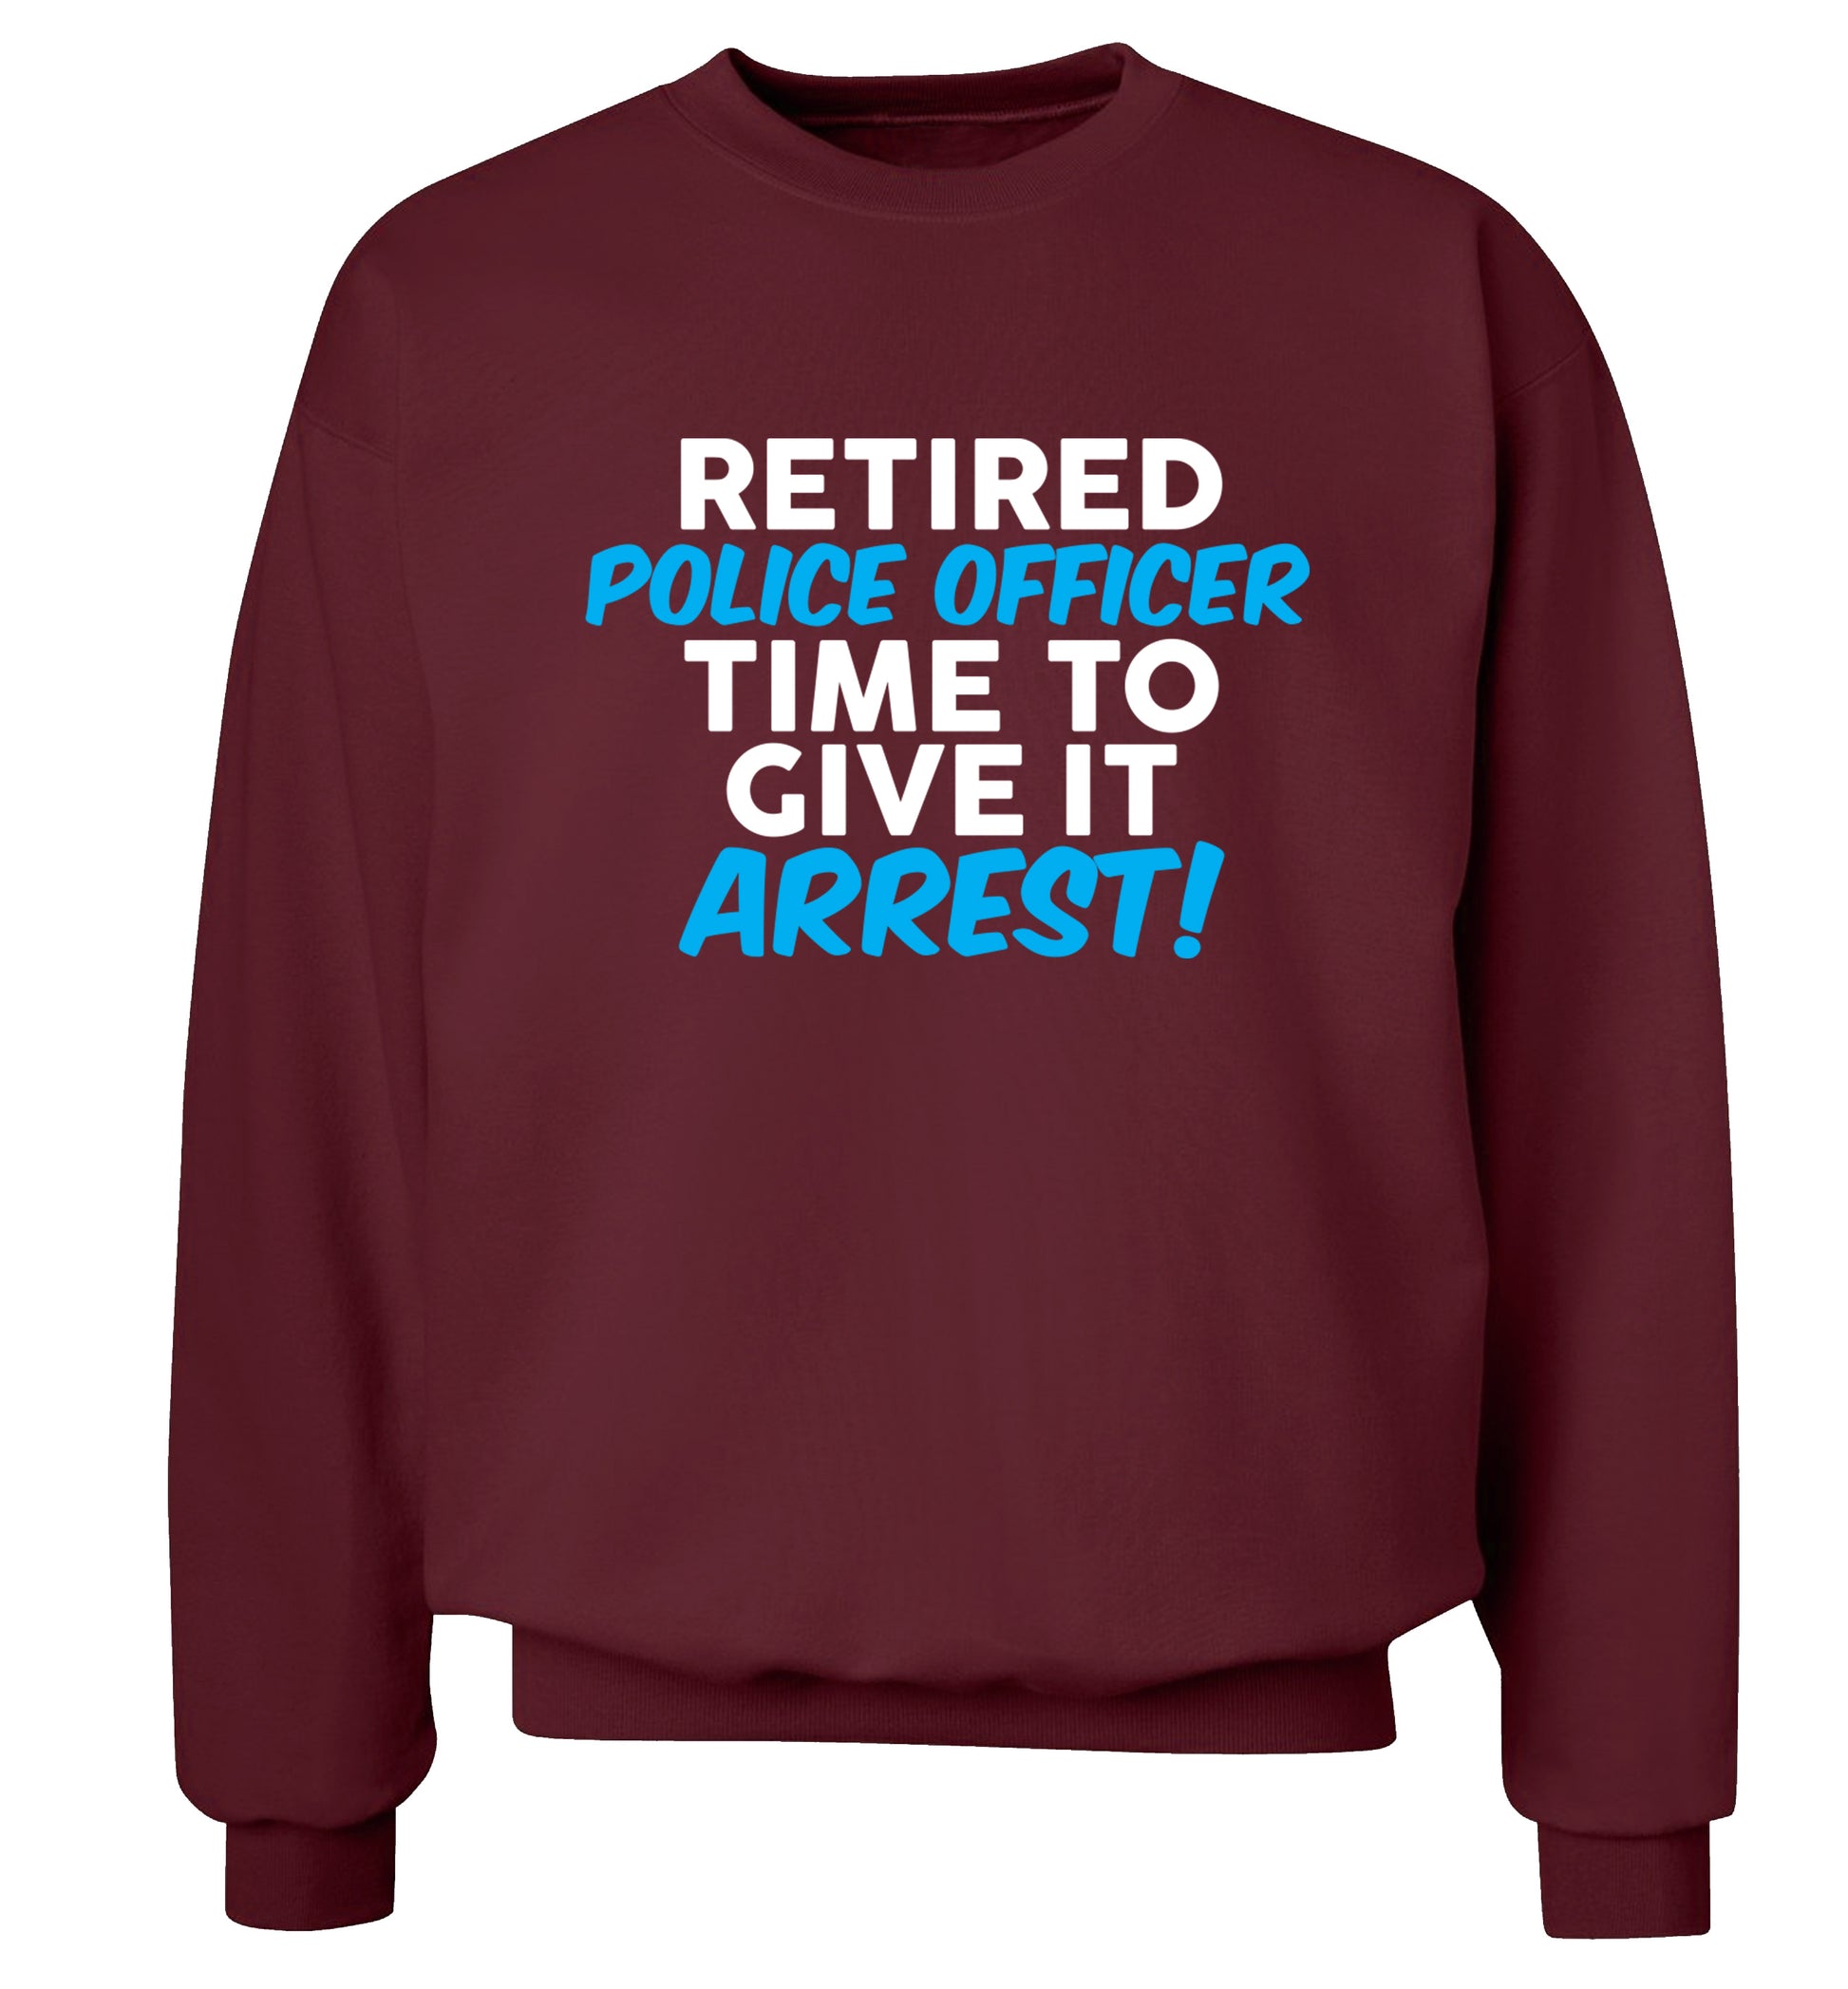 Retired police officer time to give it arrest Adult's unisex maroon Sweater 2XL